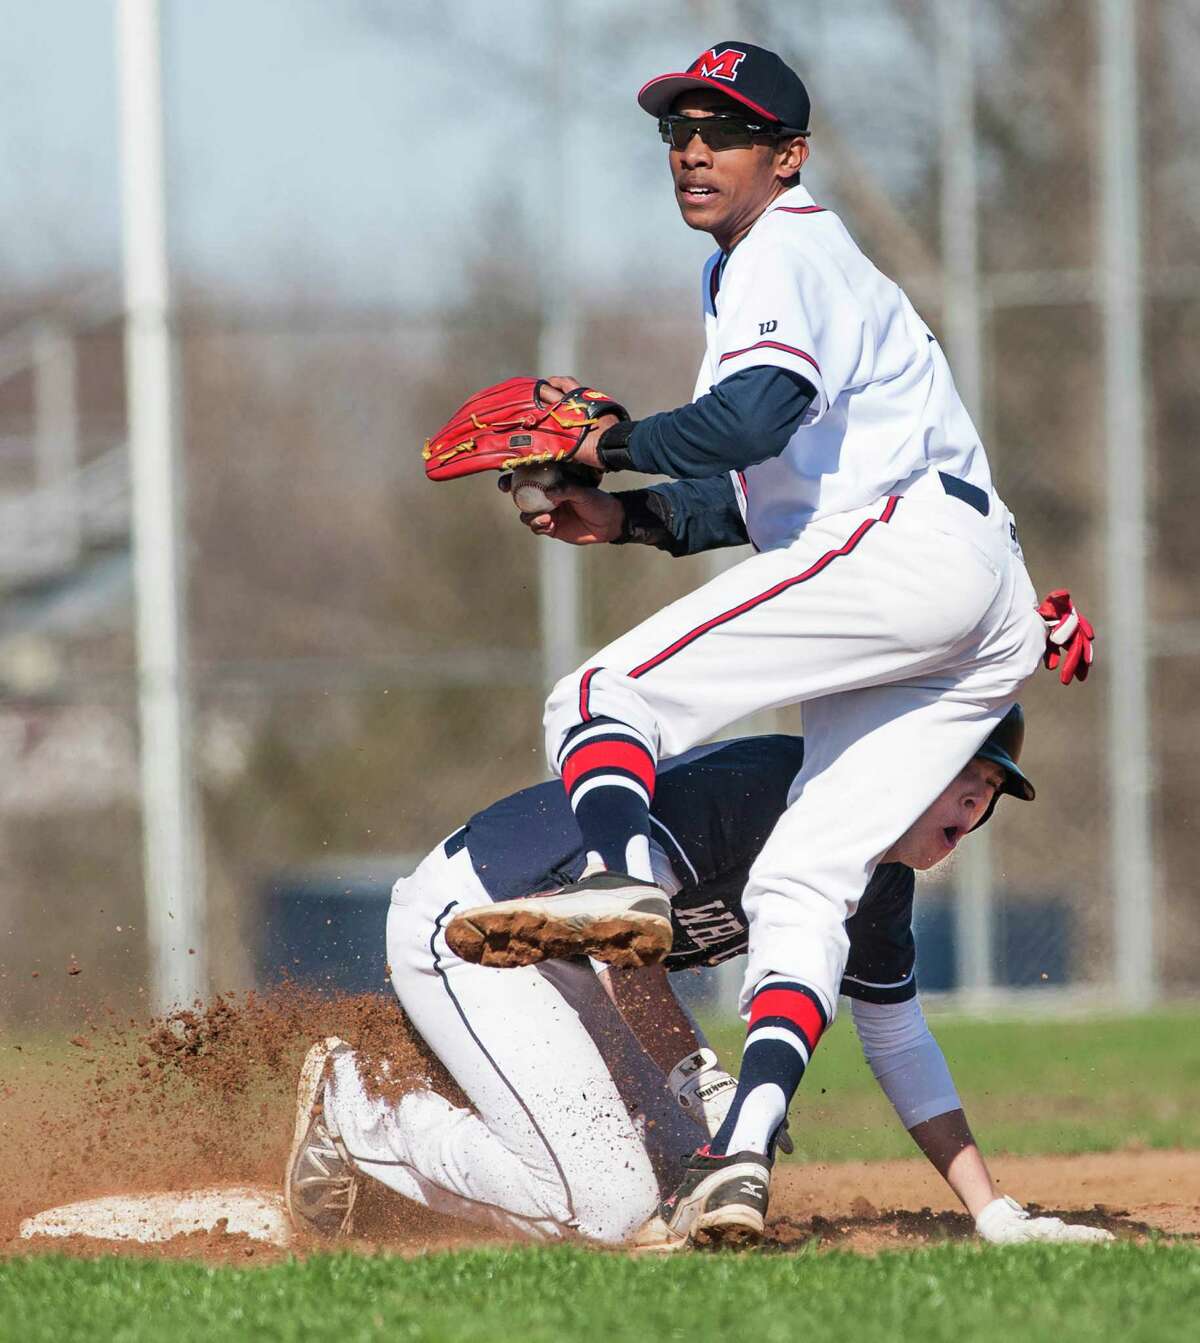 Staples high school's Nathan Panzer runs into Brien McMahon high school shortstop Edwin Owolo while sliding into second base during a boy's baseball game played at Brien McMahon high school, Norwalk, CT on Wednesday, April, 16th, 2014.